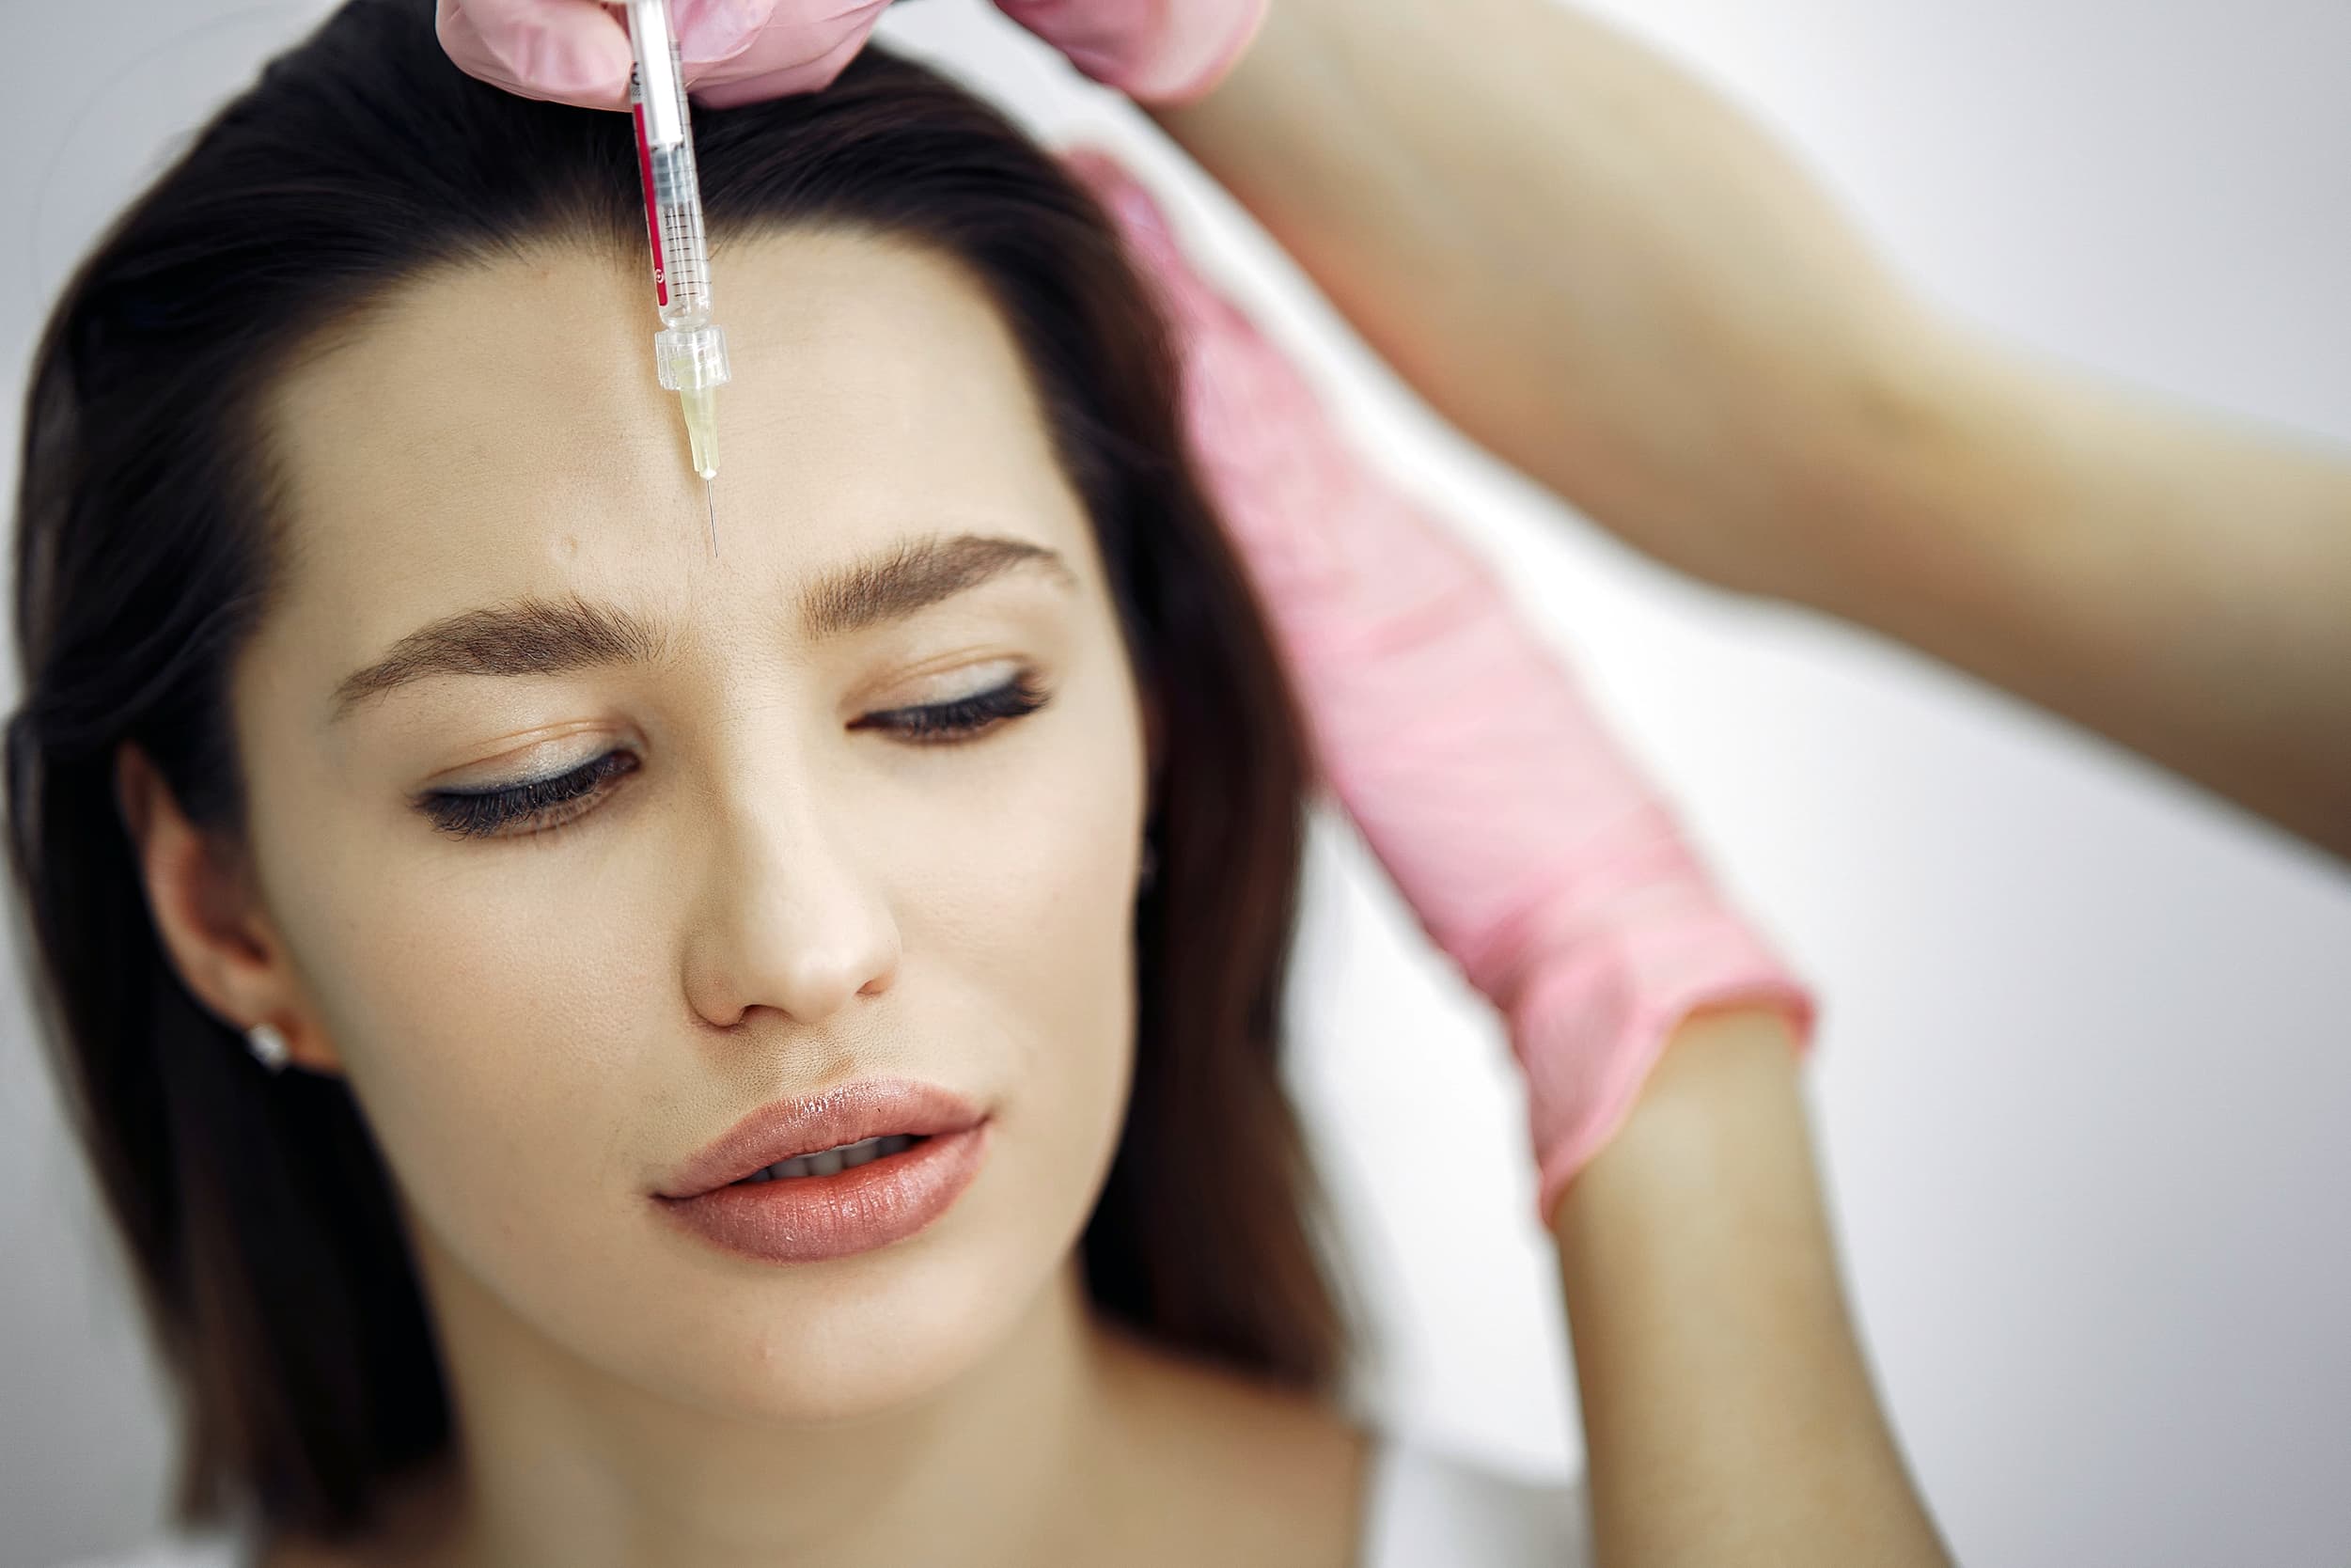 Botox and fillers in demand amongst britain's young people